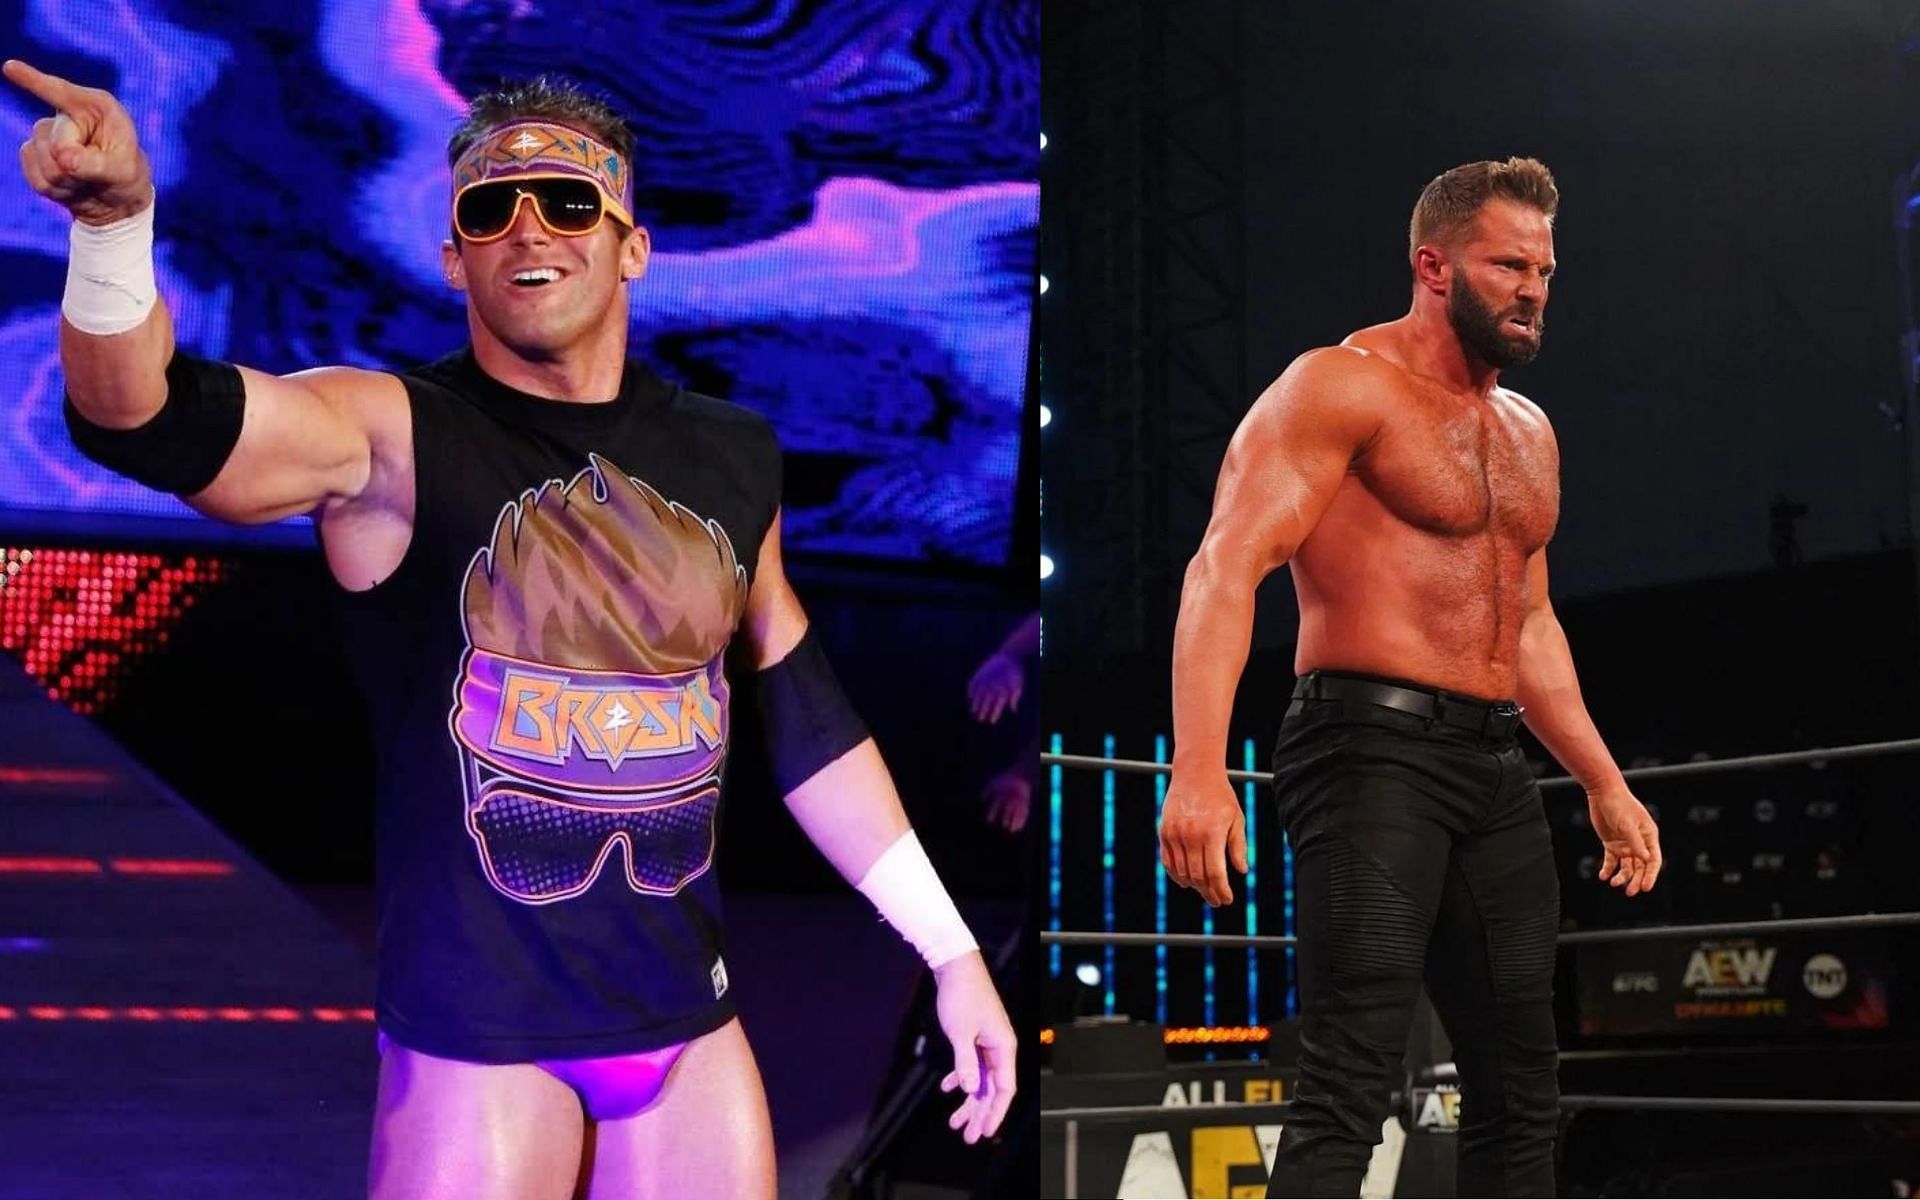 Former WWE Superstar Zack Ryder is thriving right now.